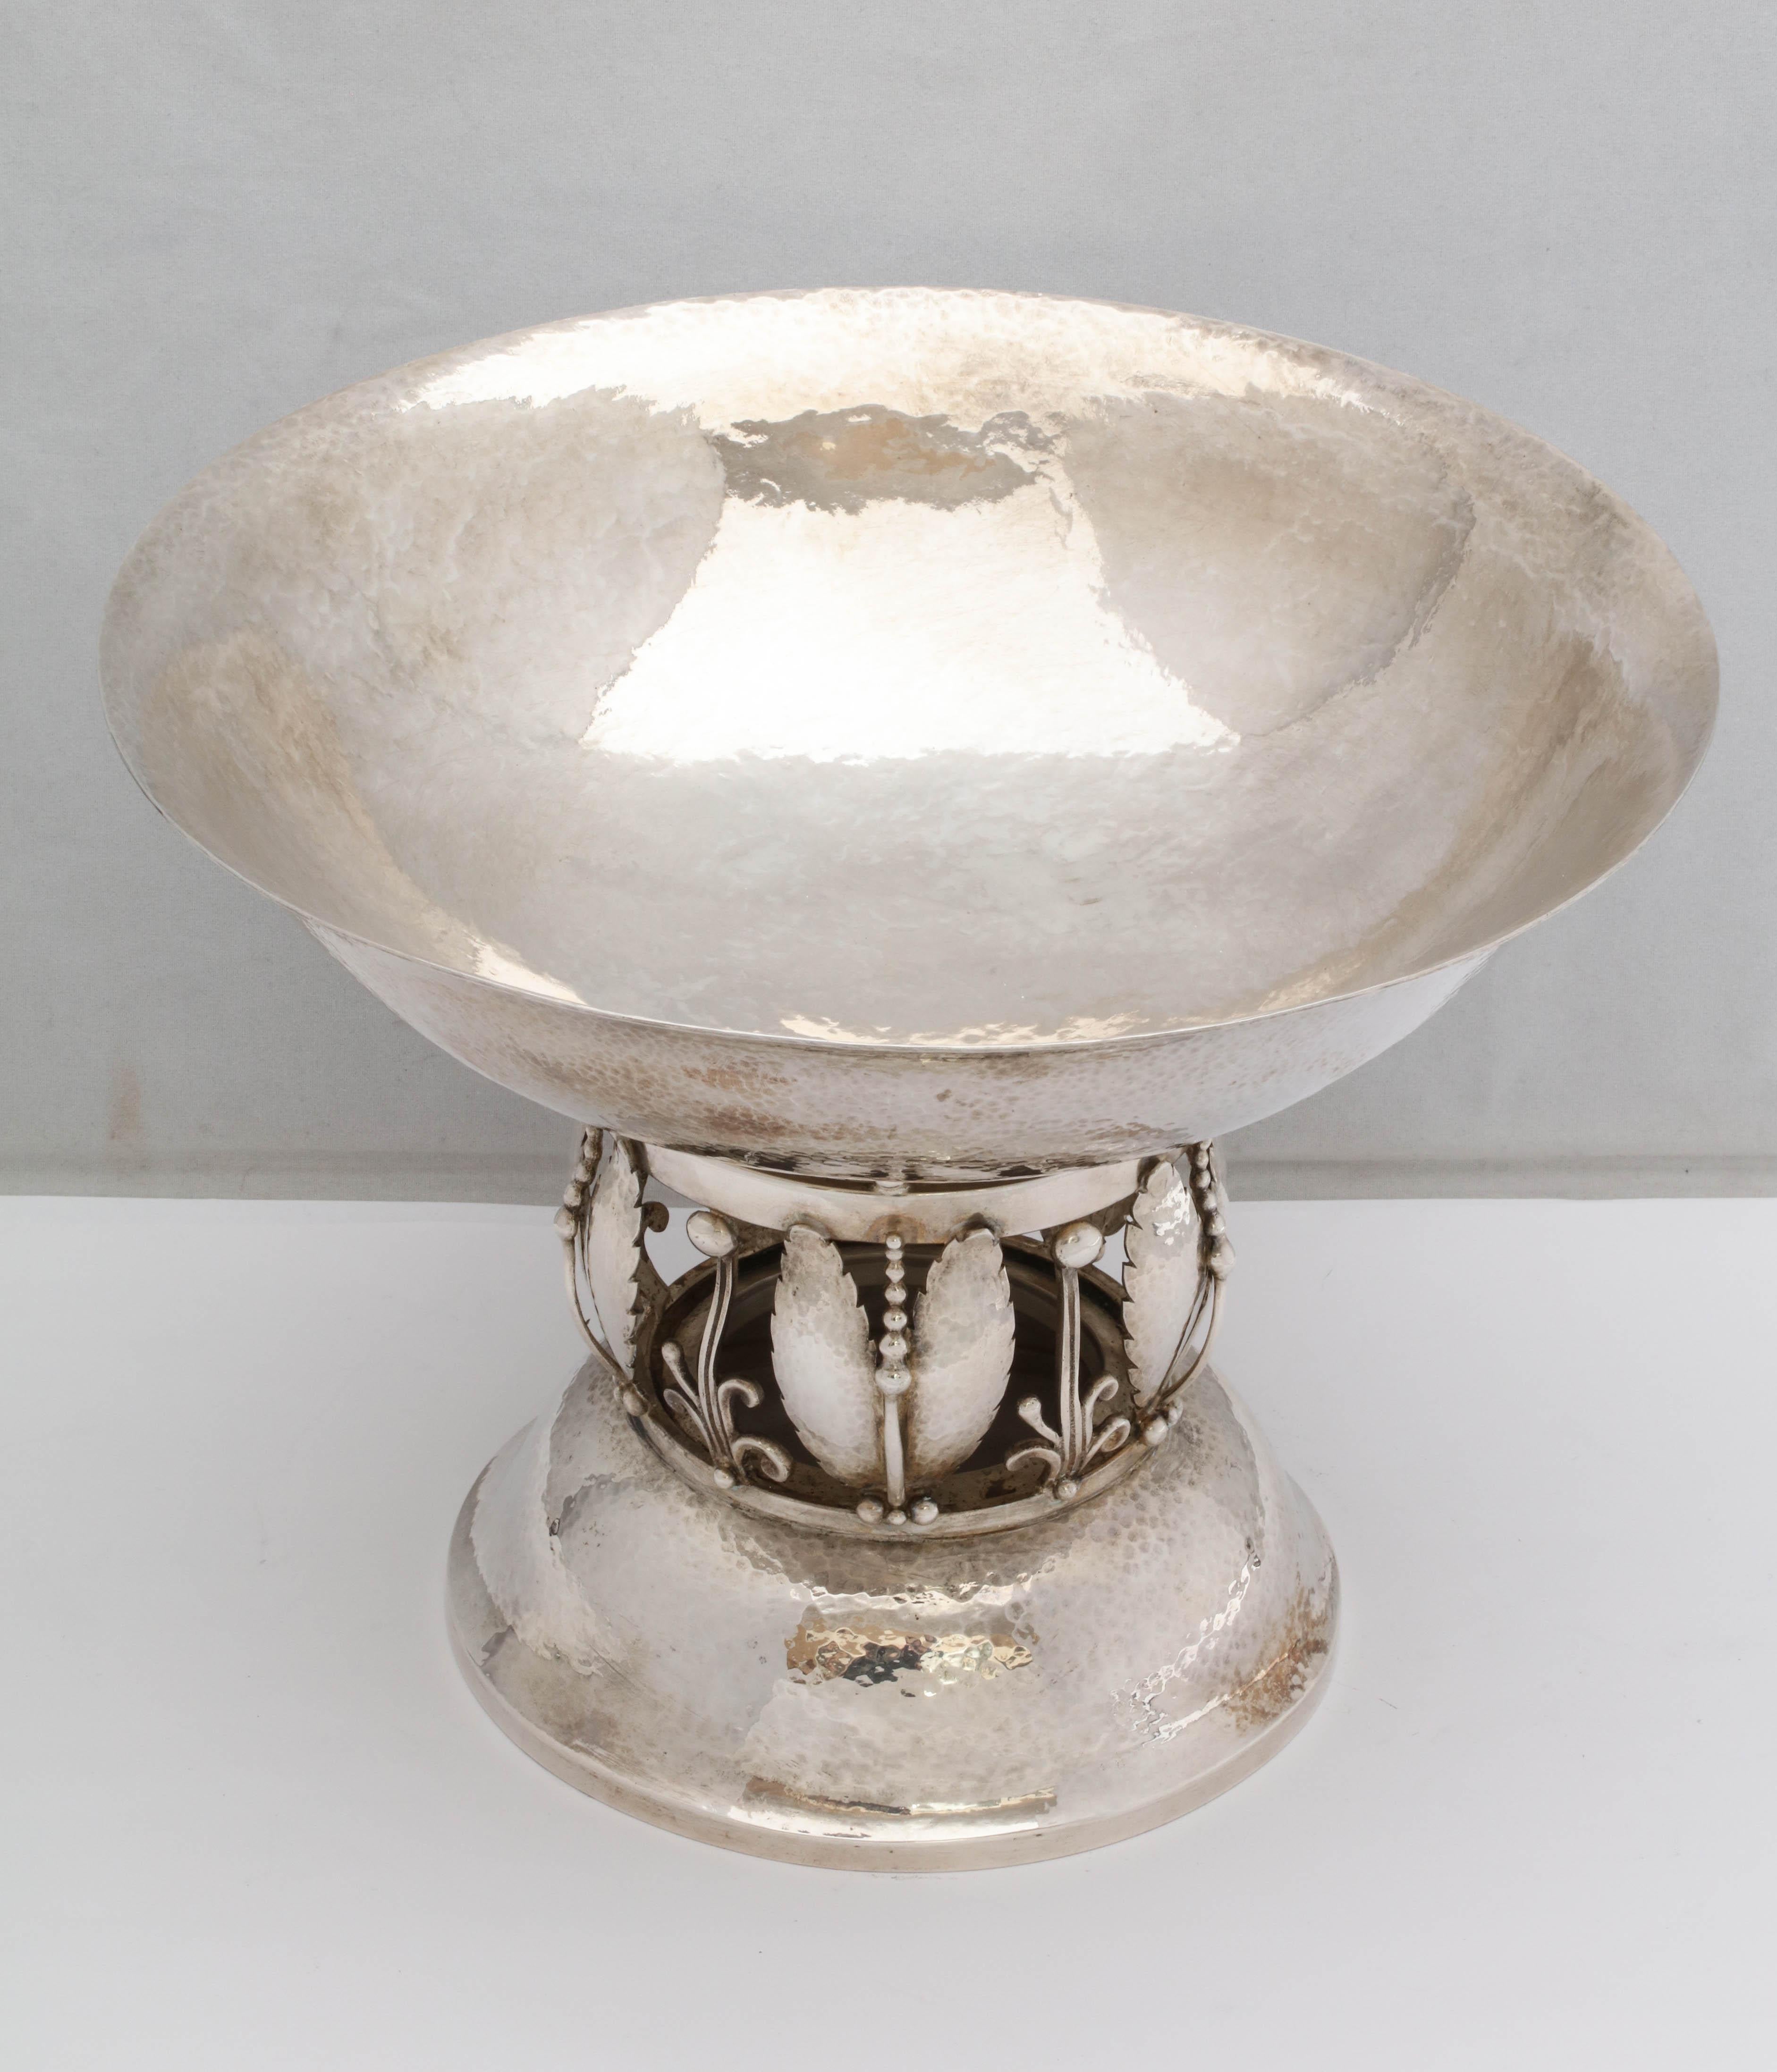 Art Deco, Jensen-Style, sterling silver centerpiece bowl, Gorham Manufacturing Co., Providence, Rhode Island, year-hallmarked for 1954. Bowl is hammered in design. Measures 9 5/8 inches in diameter across top opening x 7 1/8 inches high. Weighs